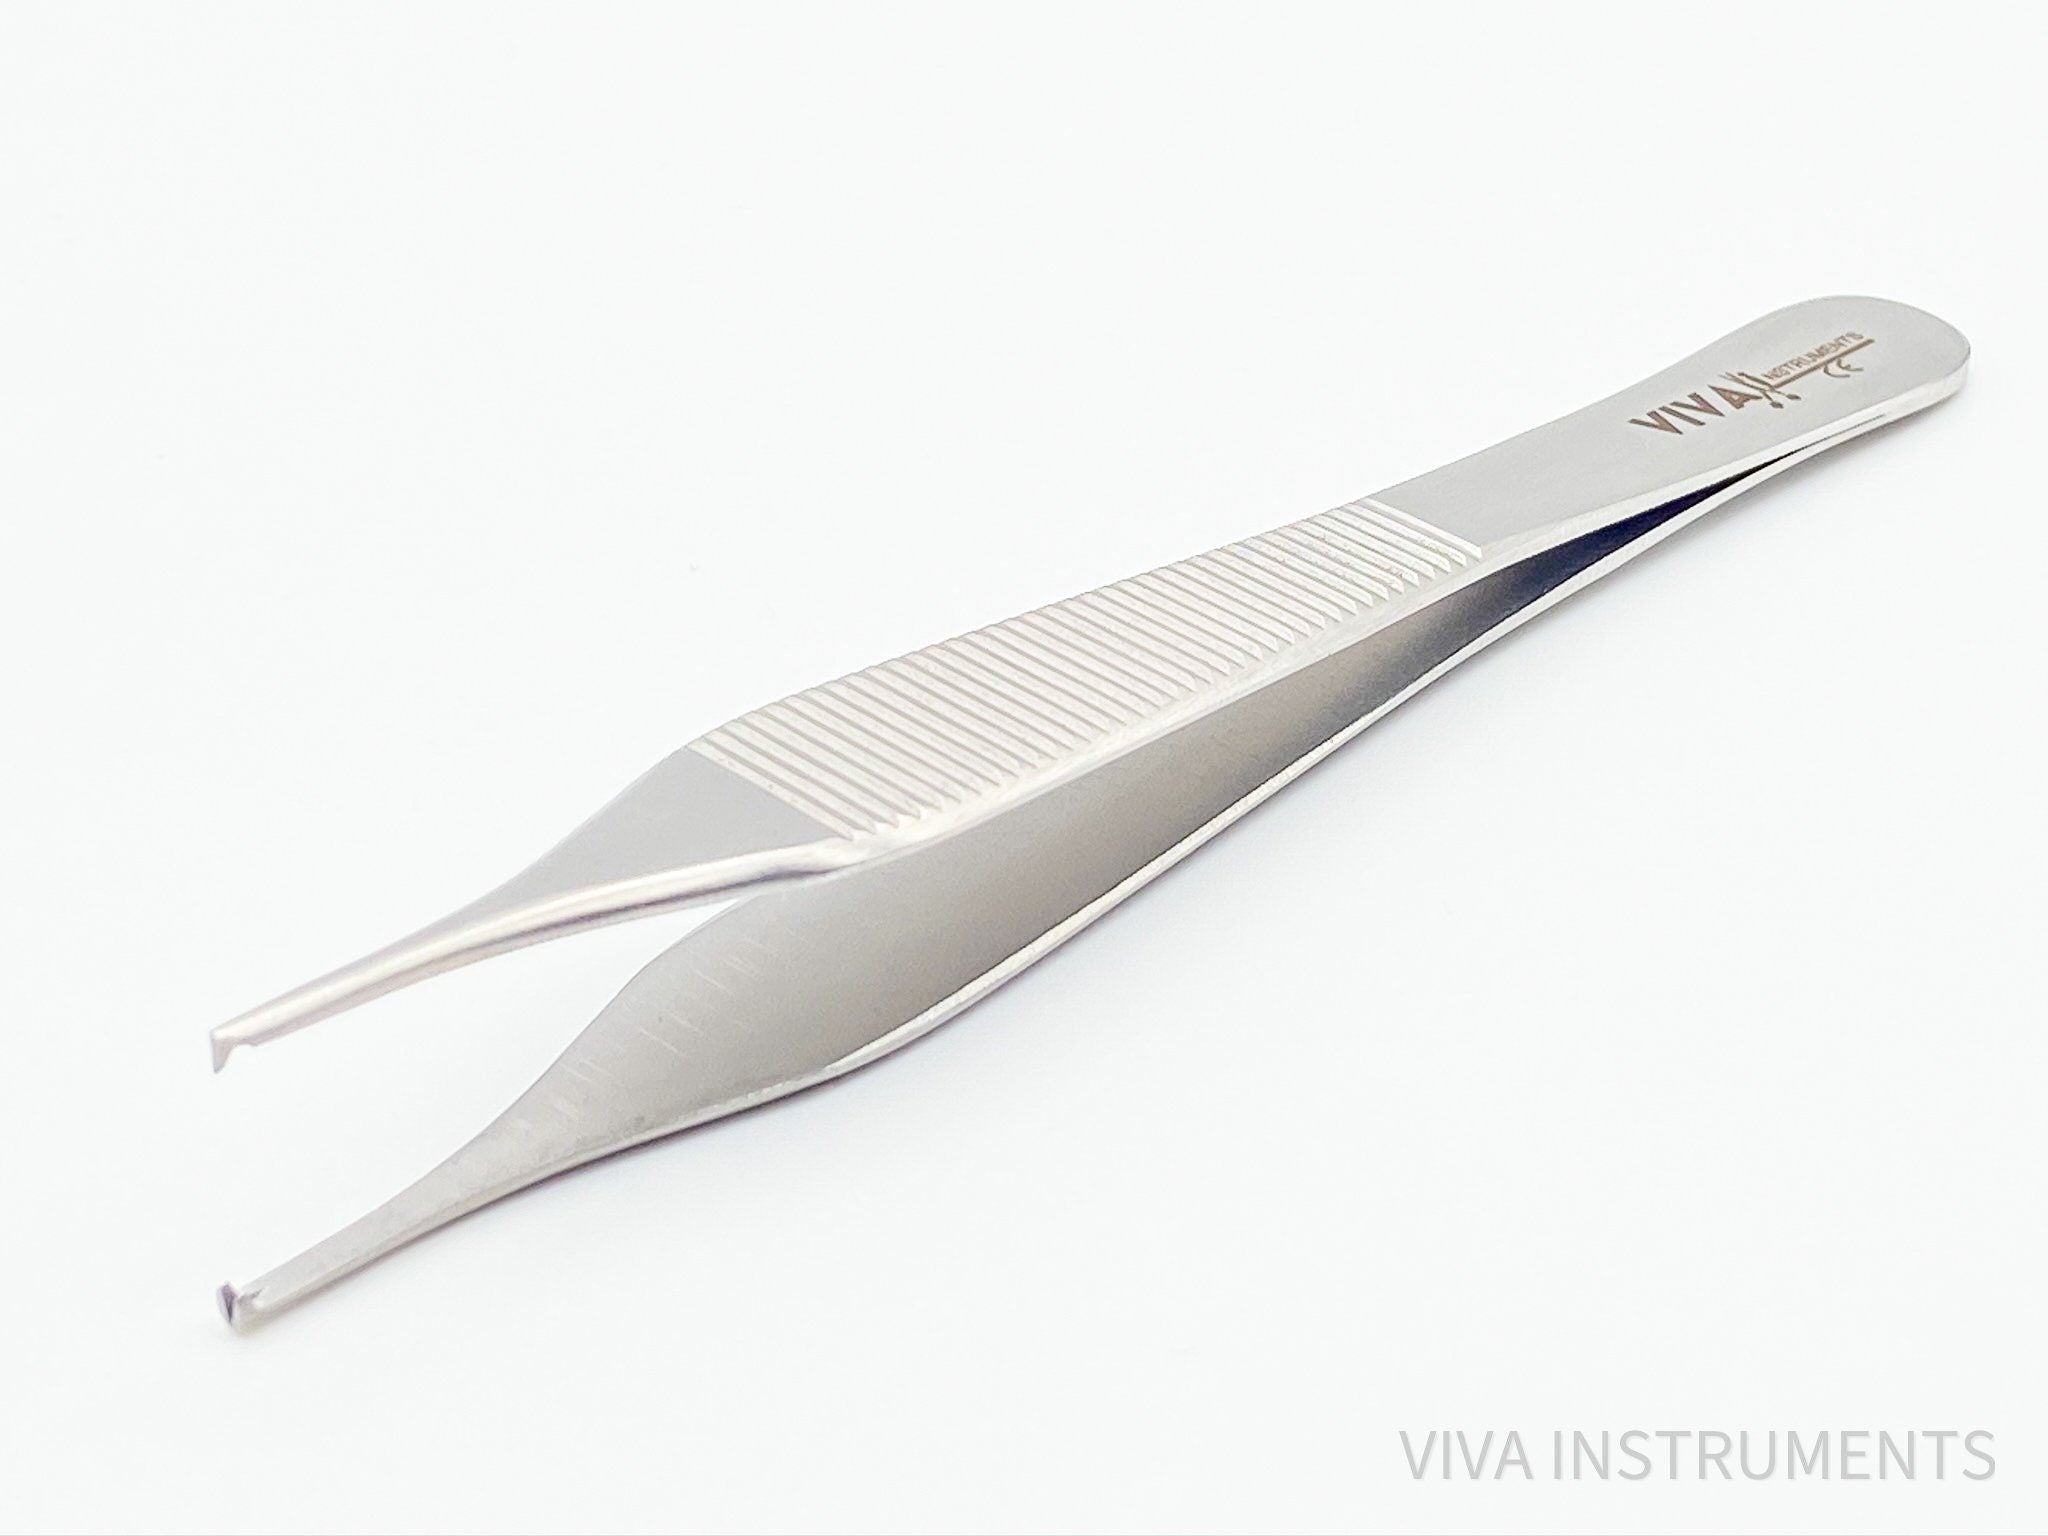 Dissecting Forceps - Adson Forceps Toothed 12.5cm